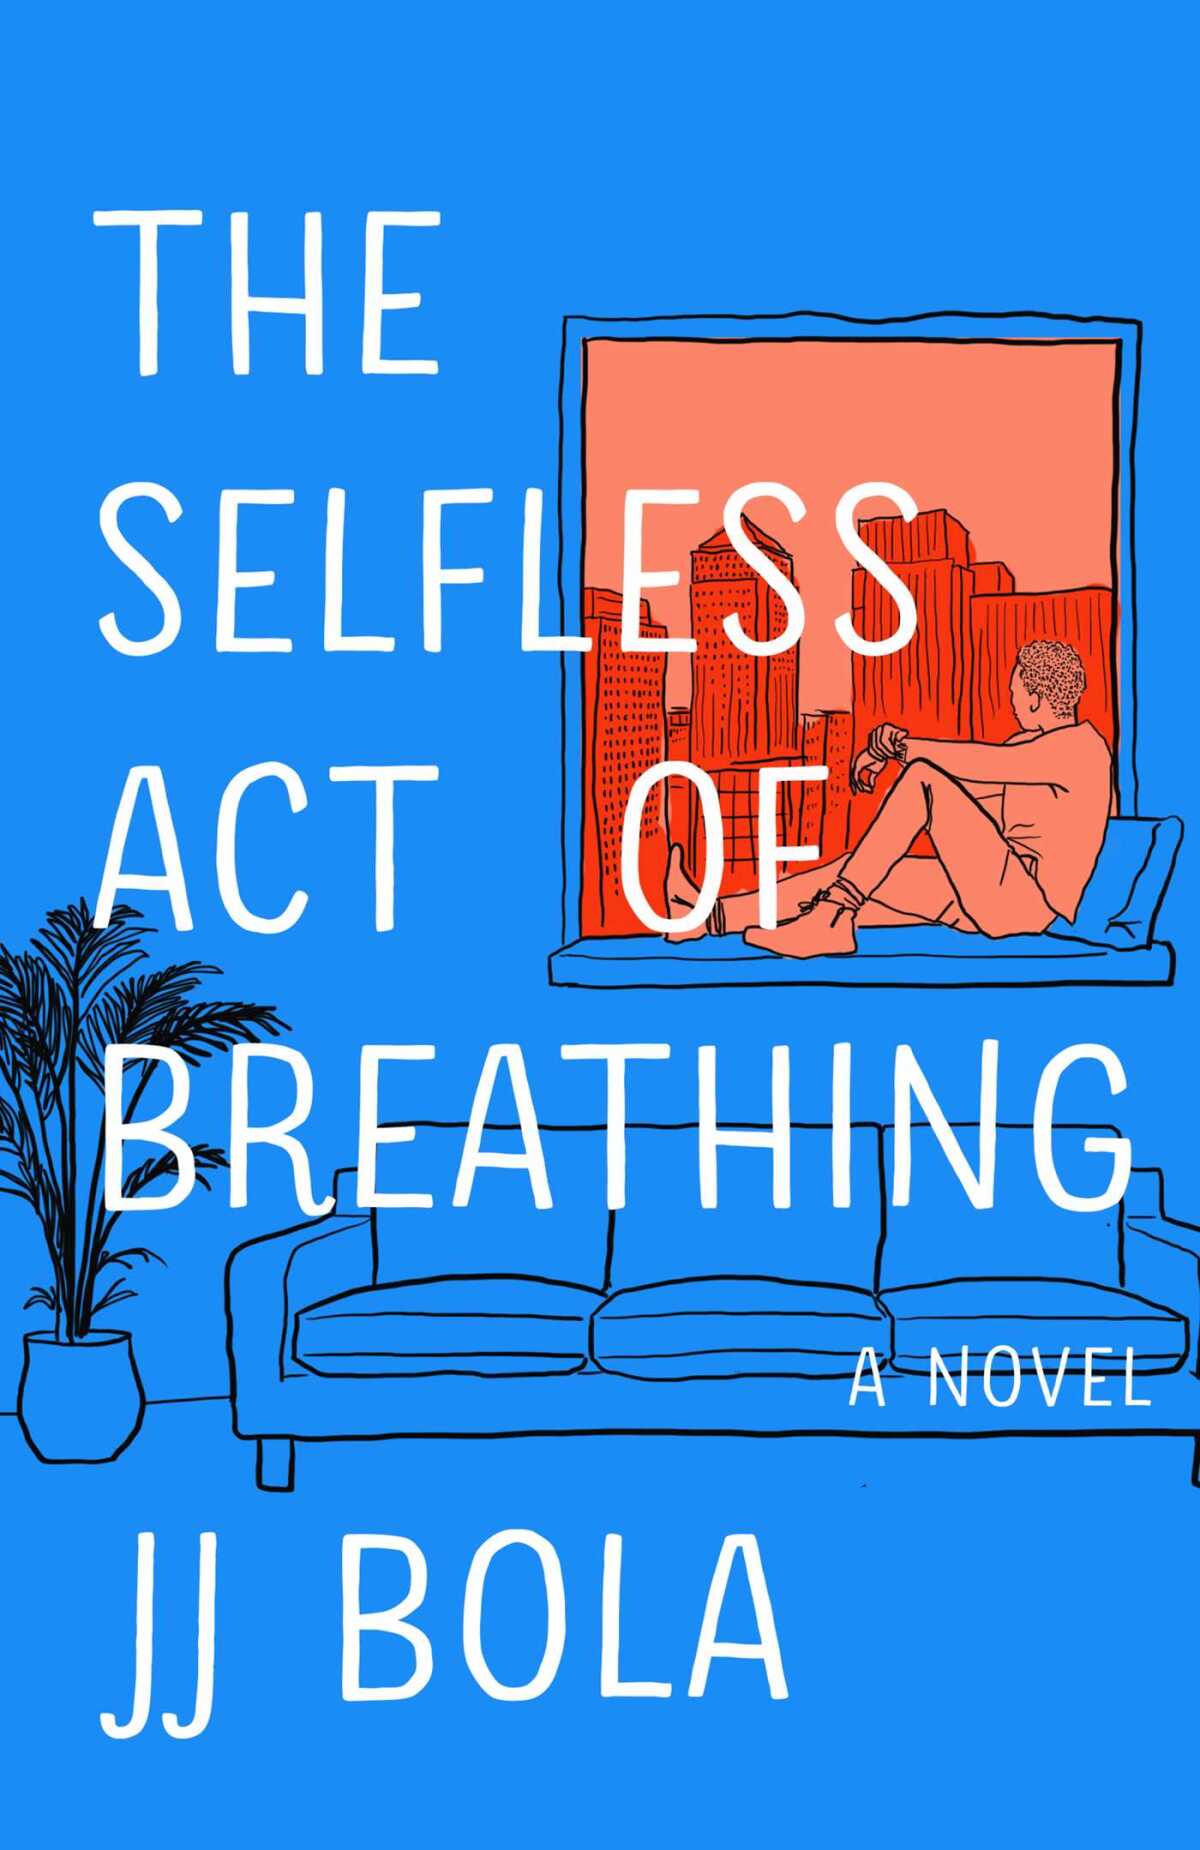 "The Selfless Act of Breathing," by JJ Bola